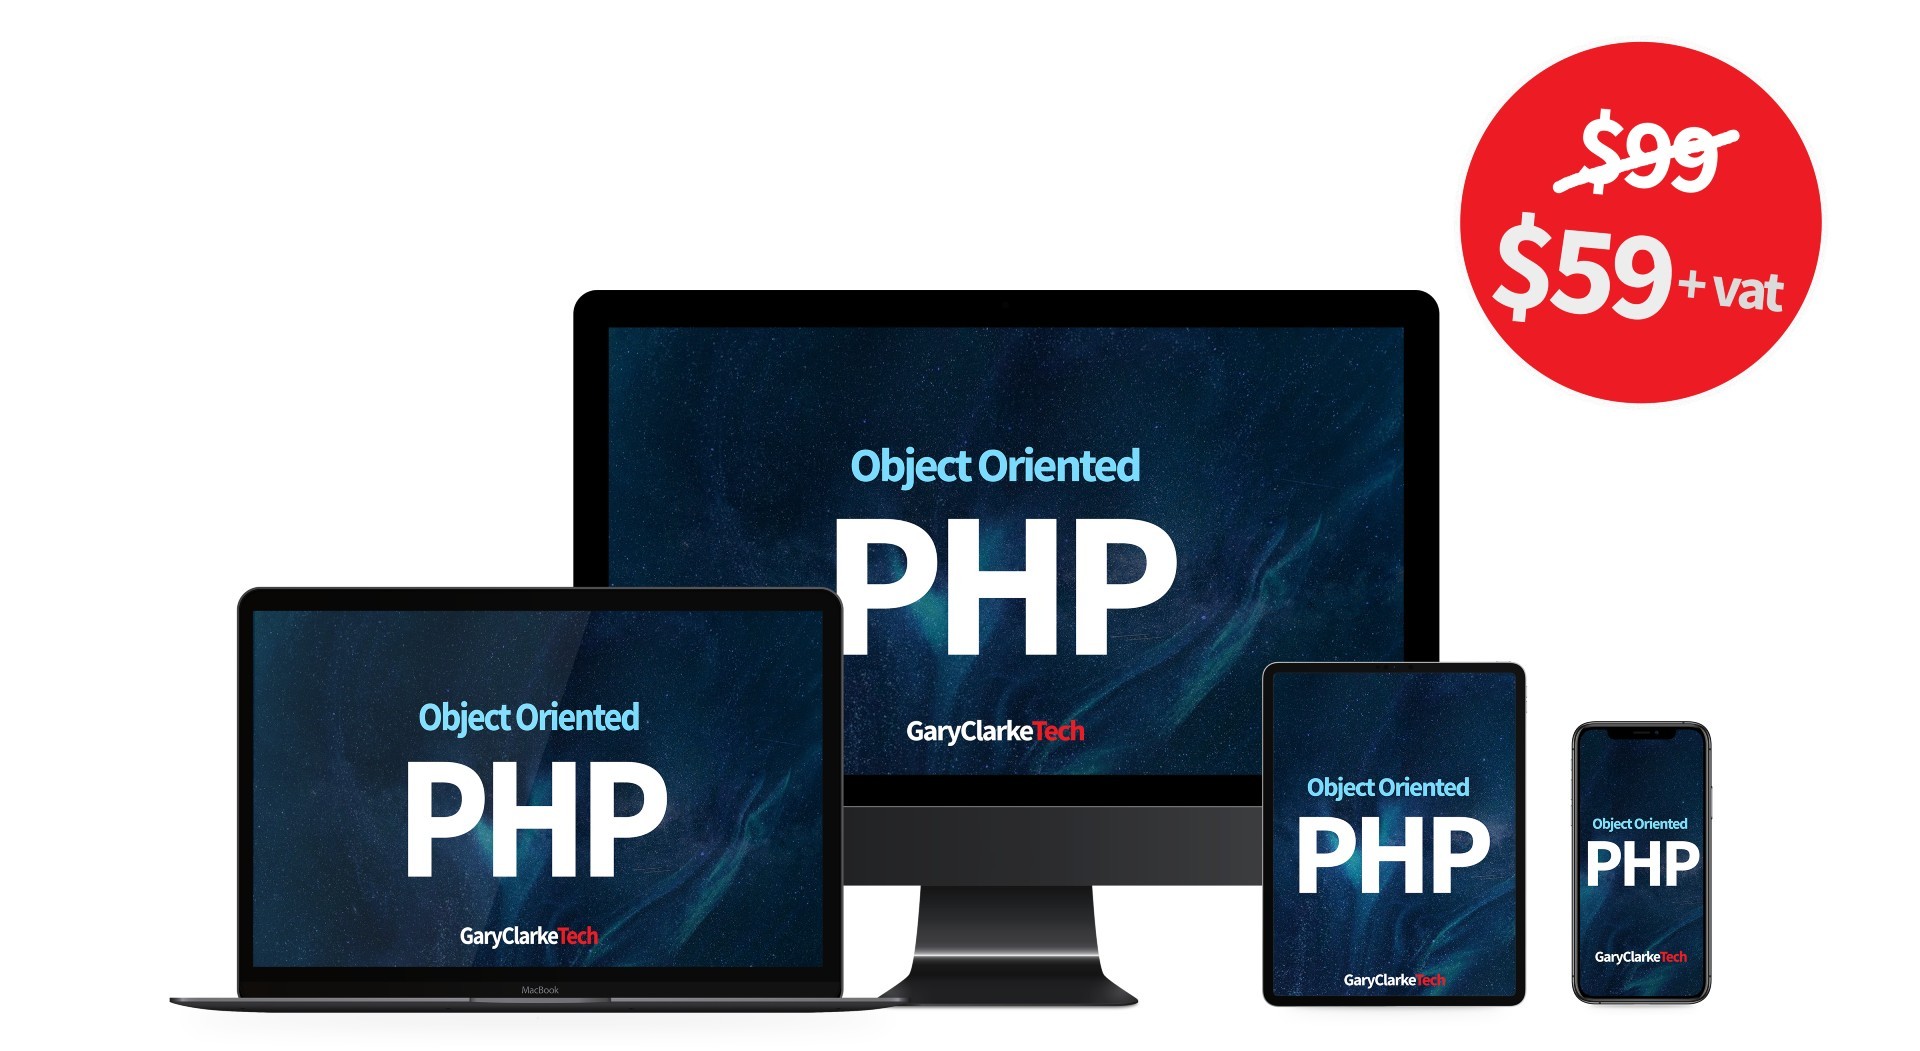 Object Oriented PHP on all devices